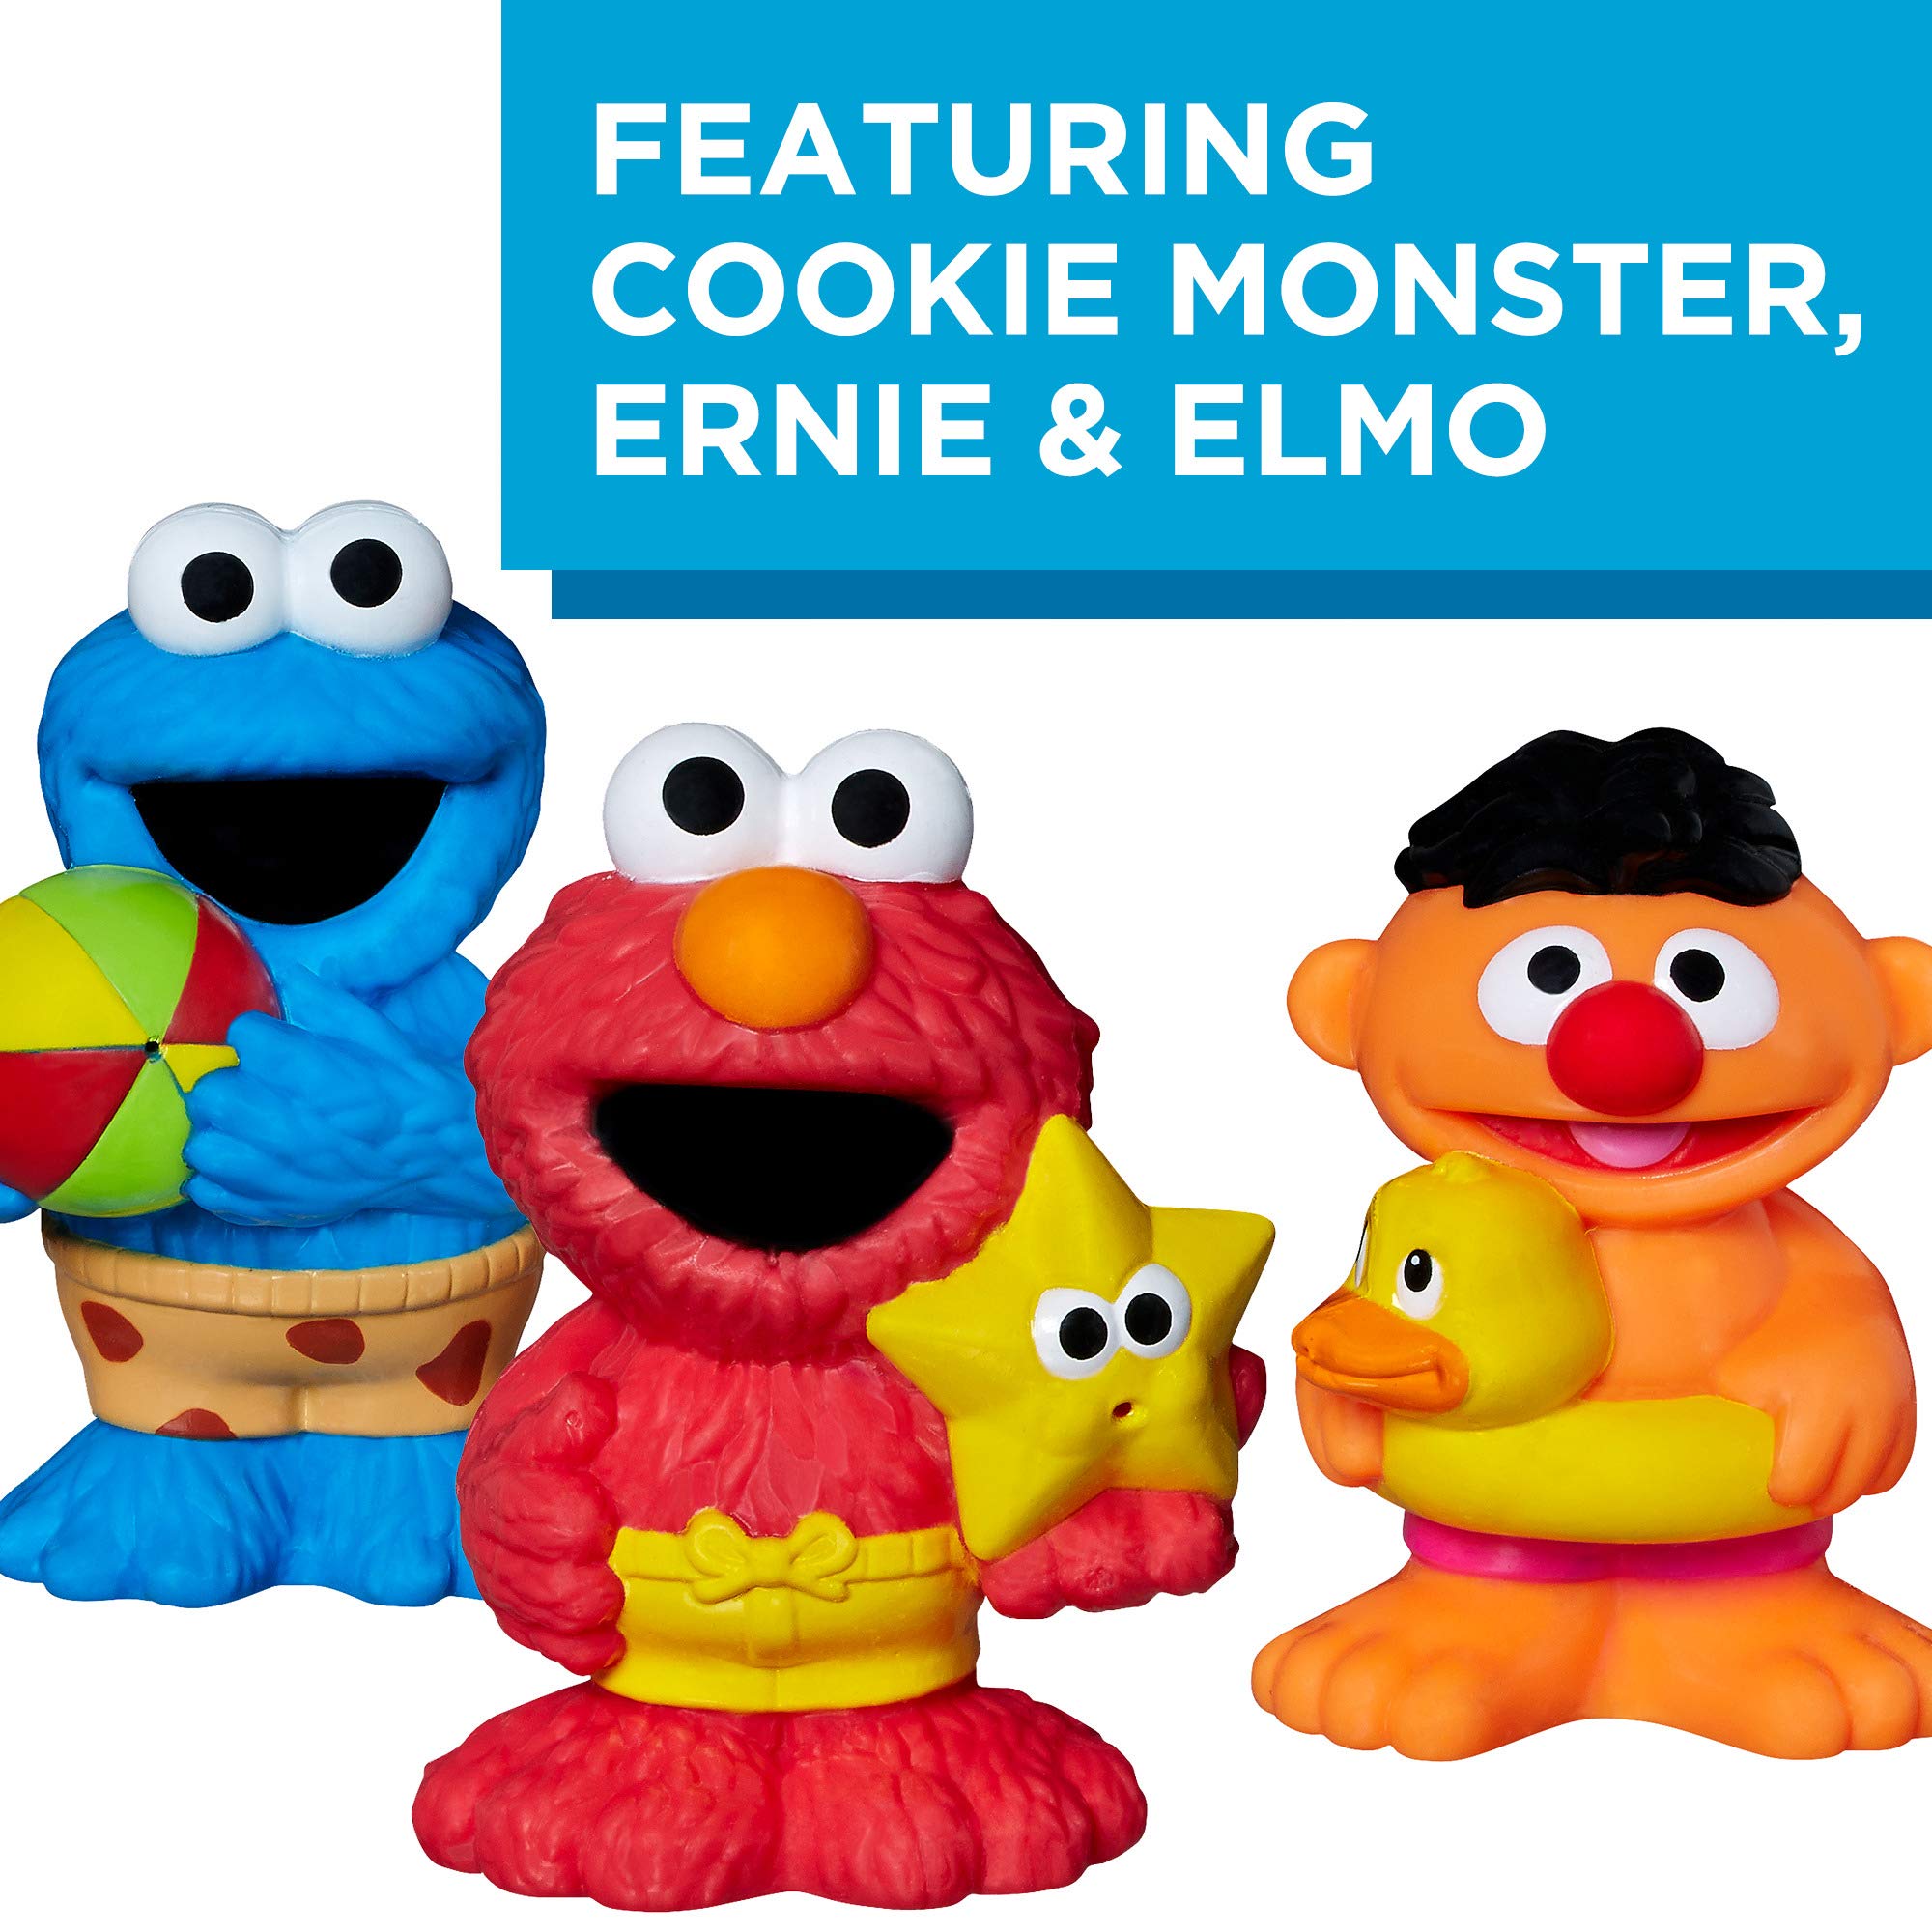 Sesame Street Bath Squirters, Bath Toys featuring Elmo, Cookie Monster and Ernie, Ages 12 Months - 4 Years Assortment (Amazon Exclusive)